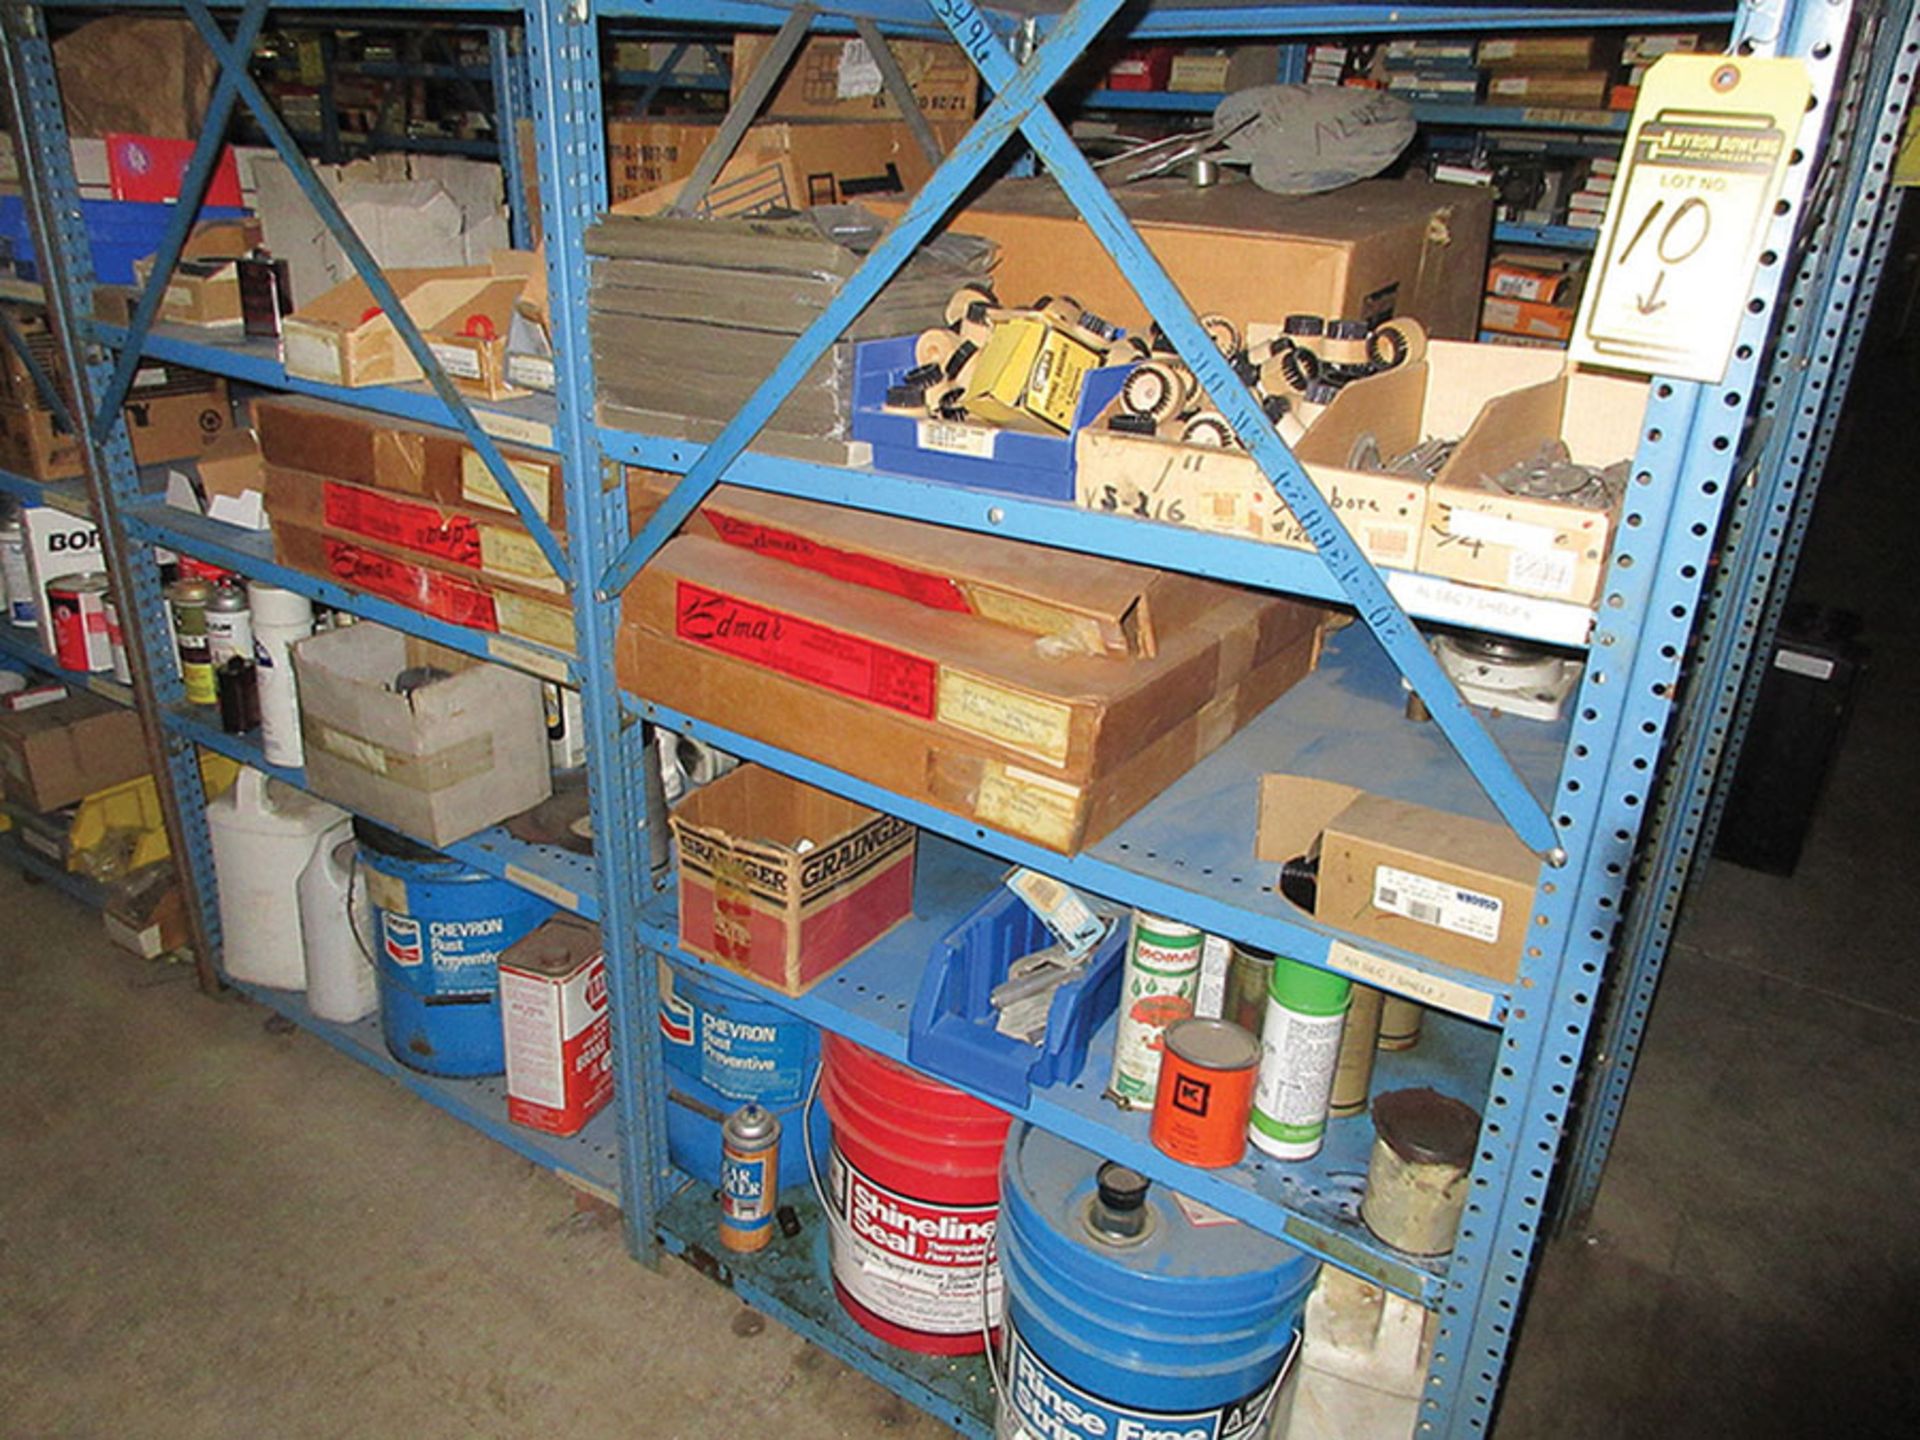 CONTENTS ON LOWER SECTION OF SHELF UNIT: DIE SPRINGS, GATE VALVES, COUPLINGS, UNIONS, AND TEES ***